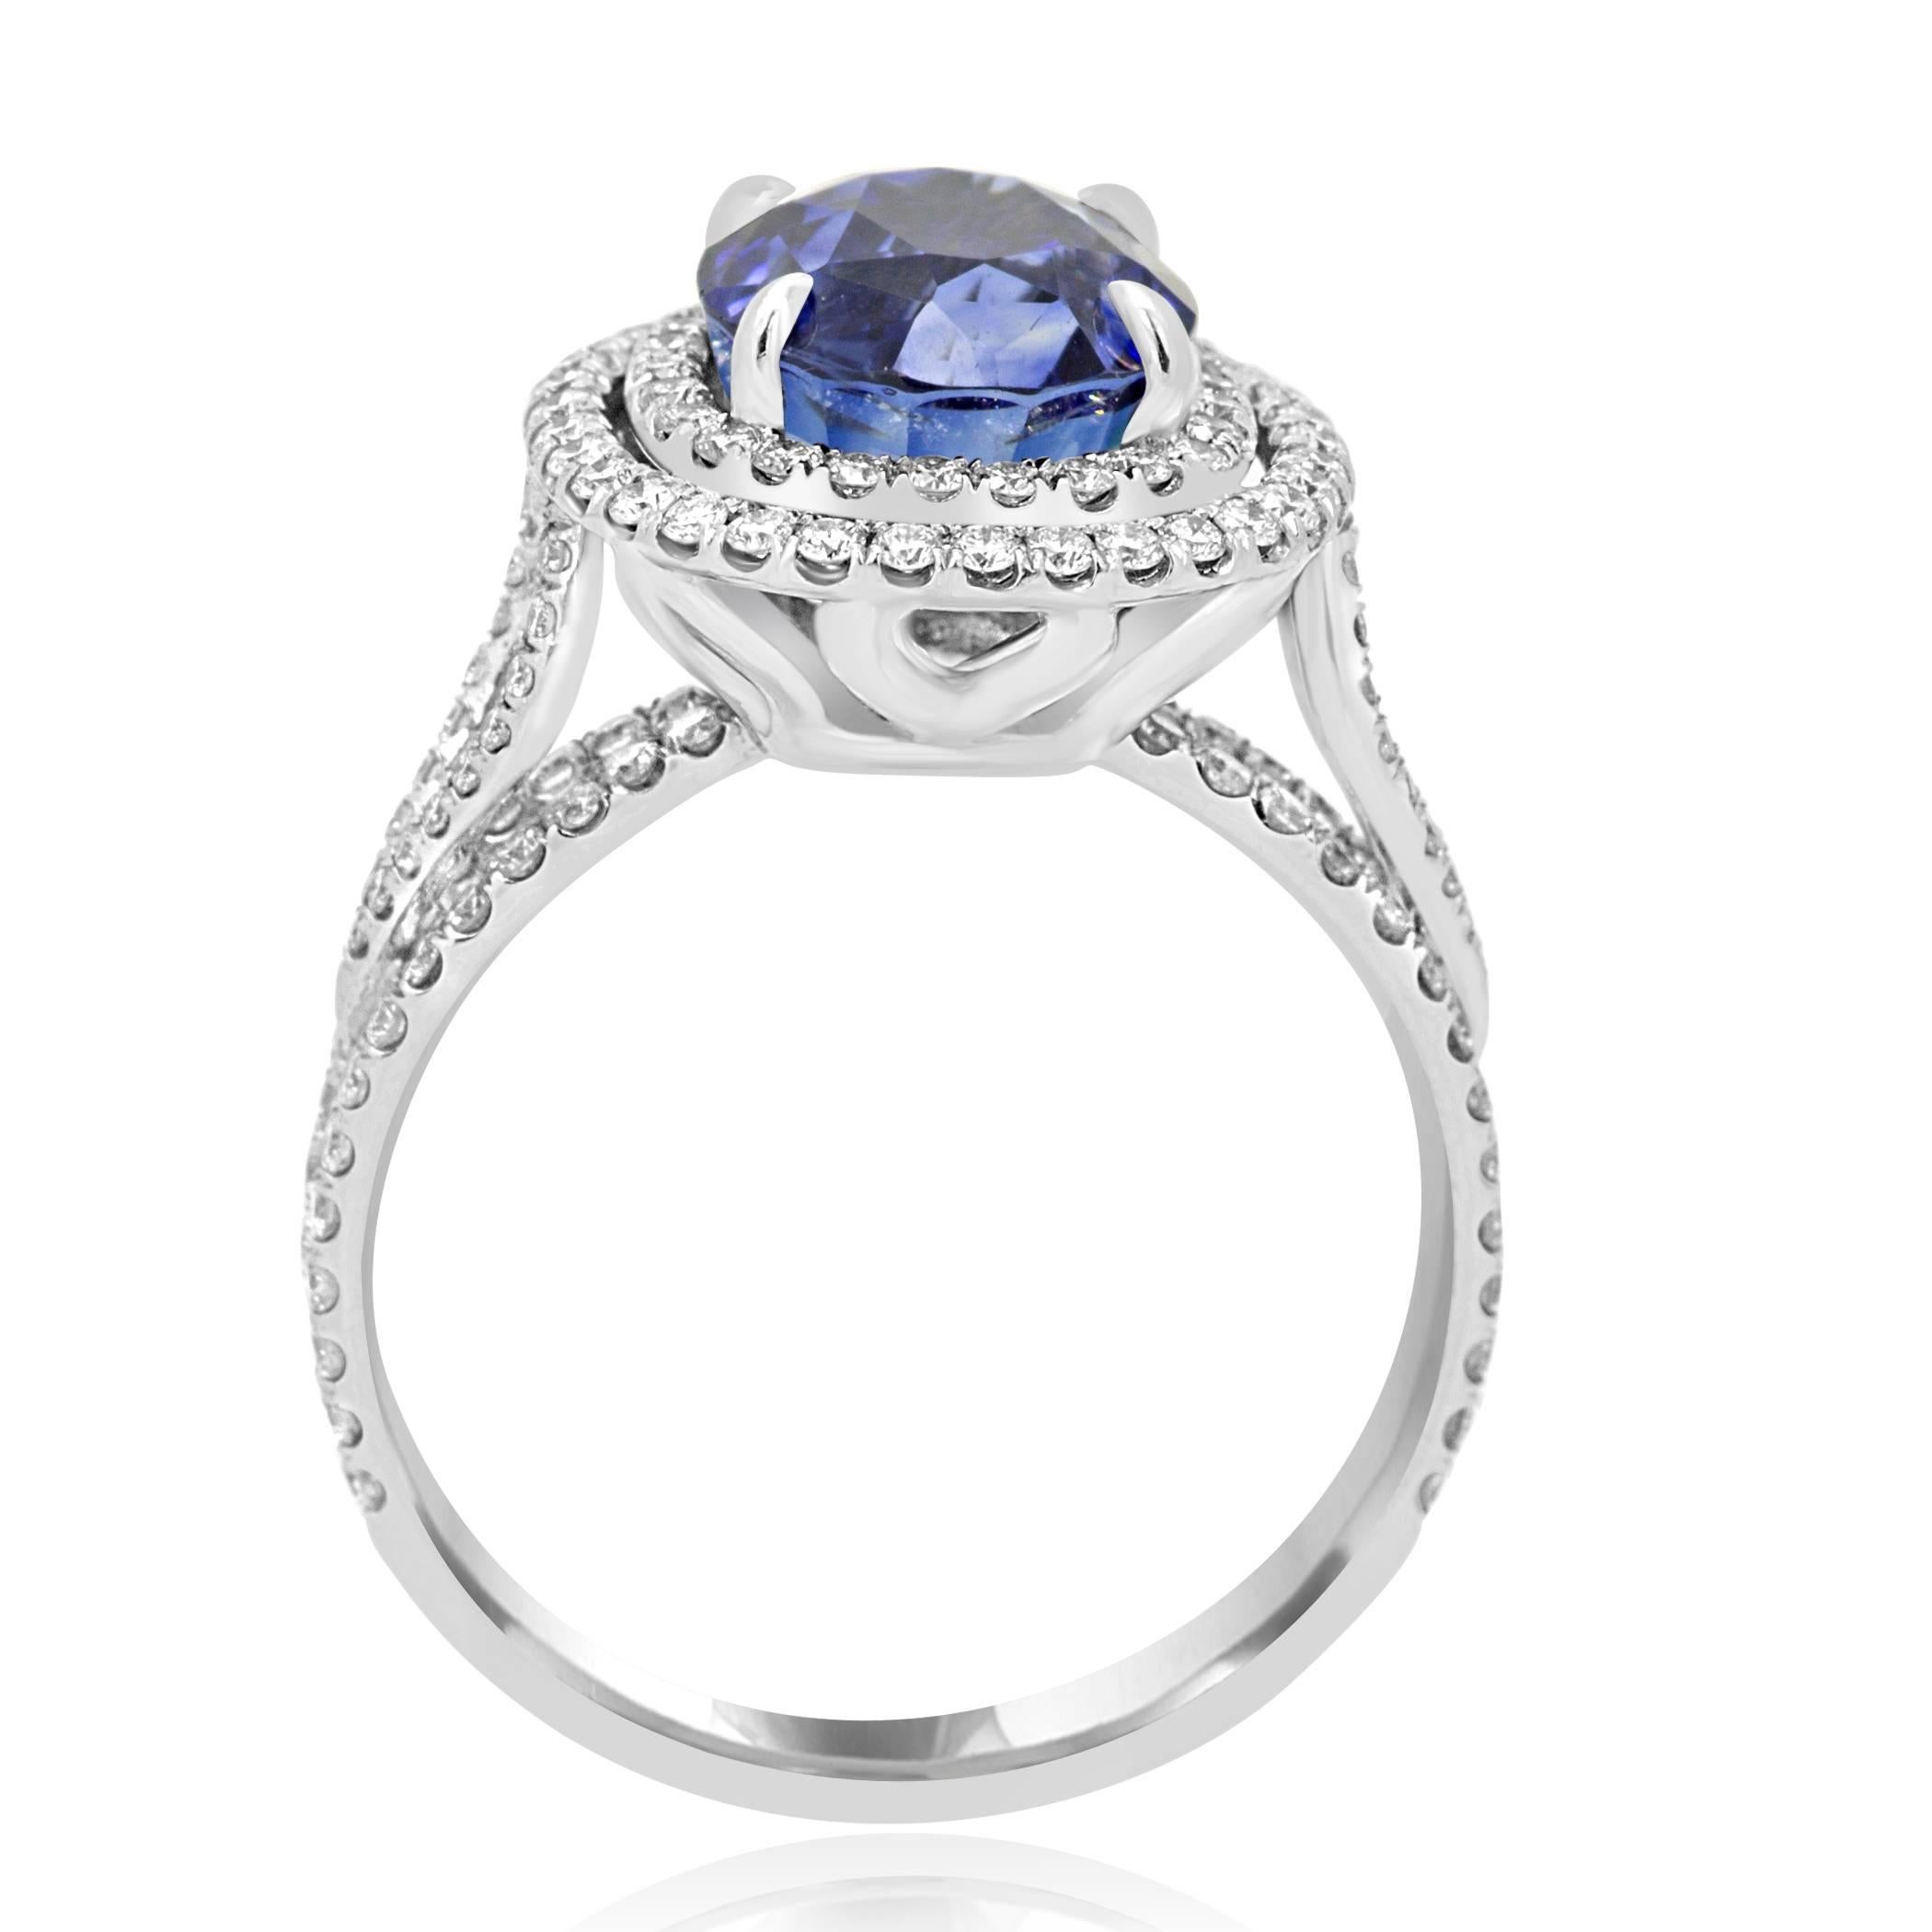 Modern Gia Certified 4.30 Carat Blue Sapphire Diamond Double Halo Bridal Gold Ring